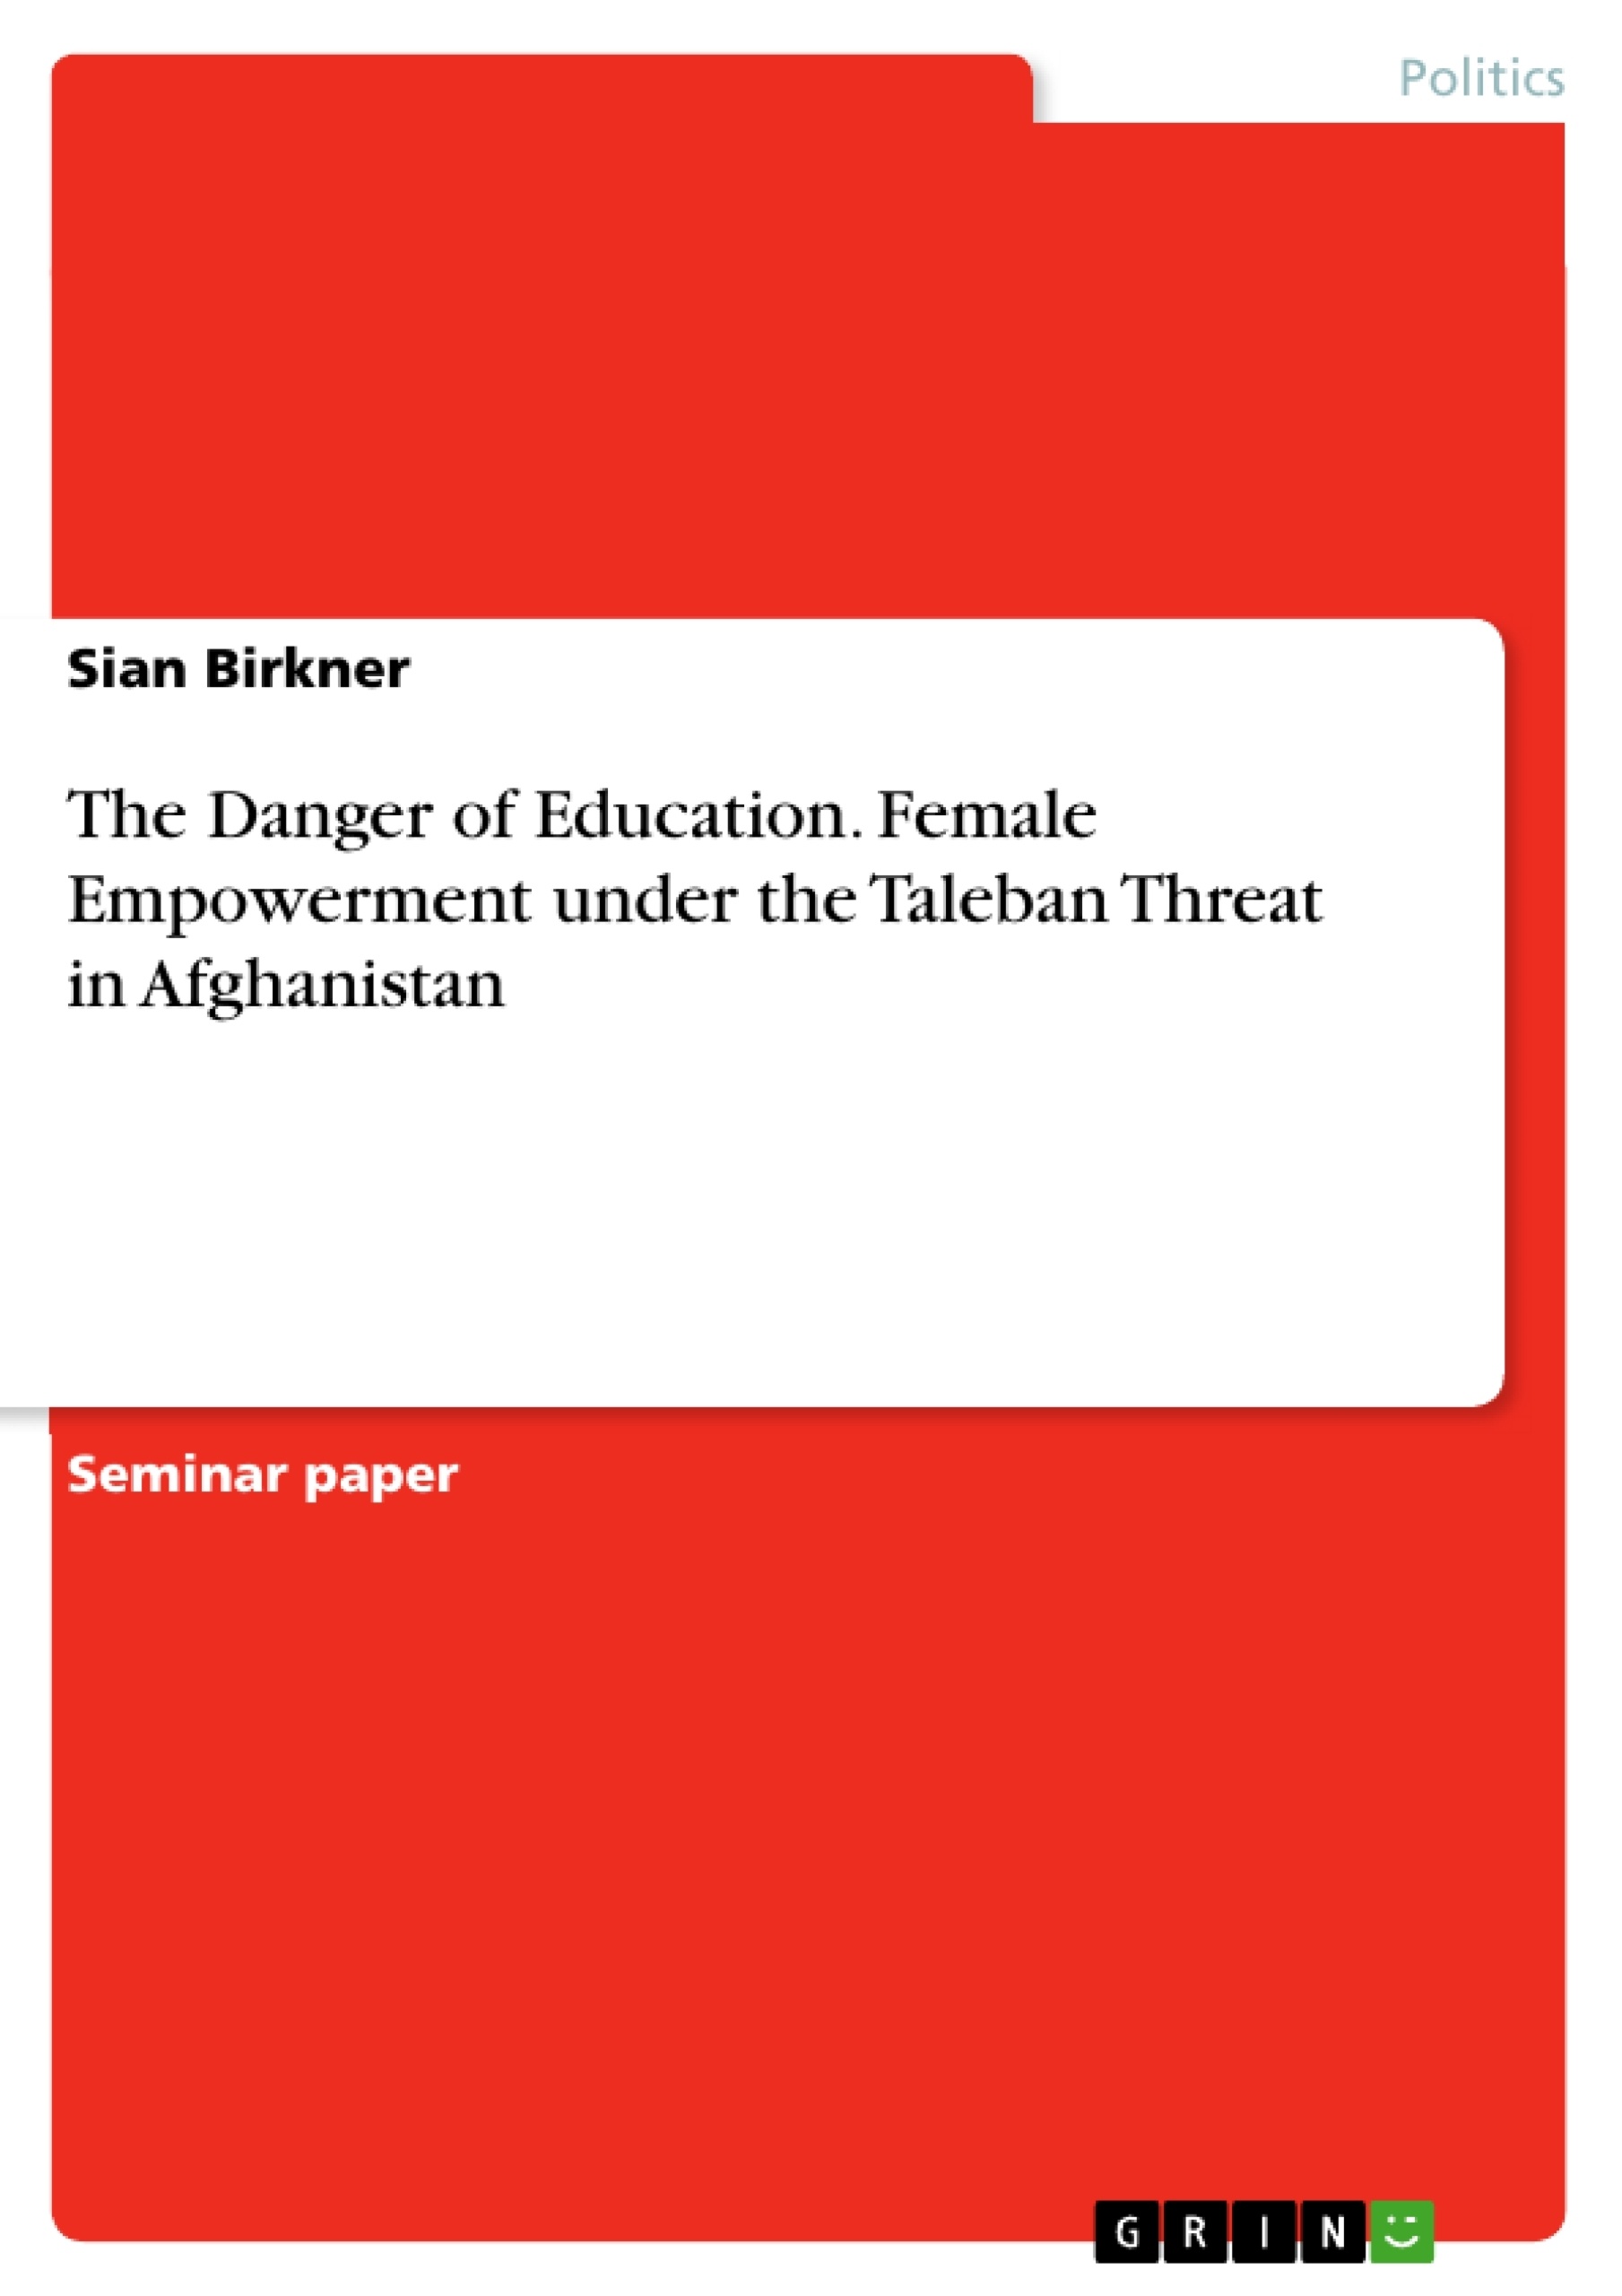 Title: The Danger of Education. Female Empowerment under the Taleban Threat in Afghanistan